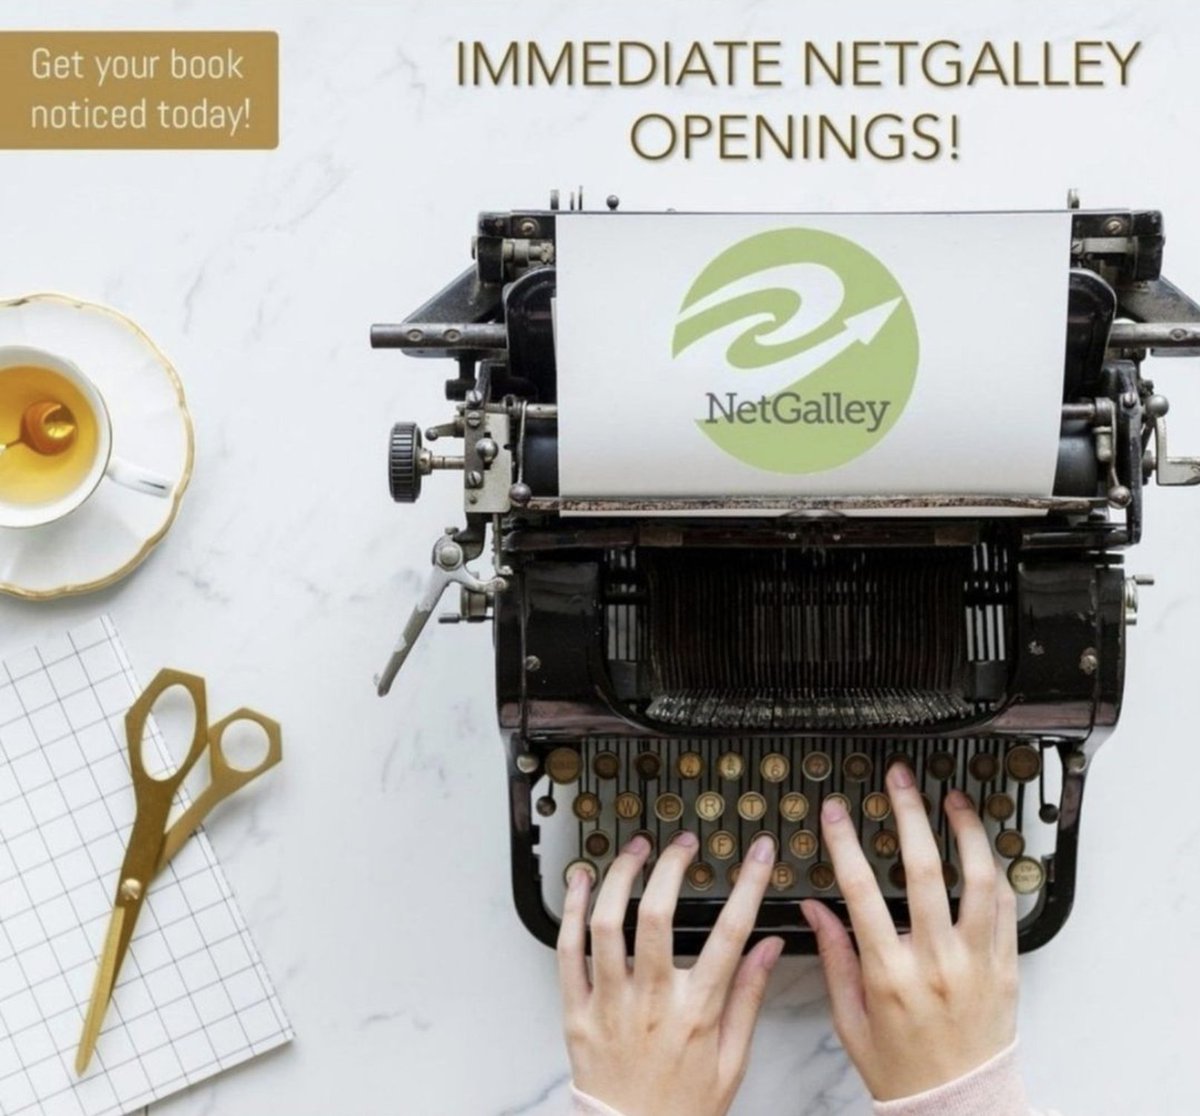 #Authors! Xpresso Tours has openings for blitzes & Netgalley starting in mid January! 1-month NetGalley for only $45 when combined with a blitz! xpressobooktours.com #WritingCommunity #amwriting